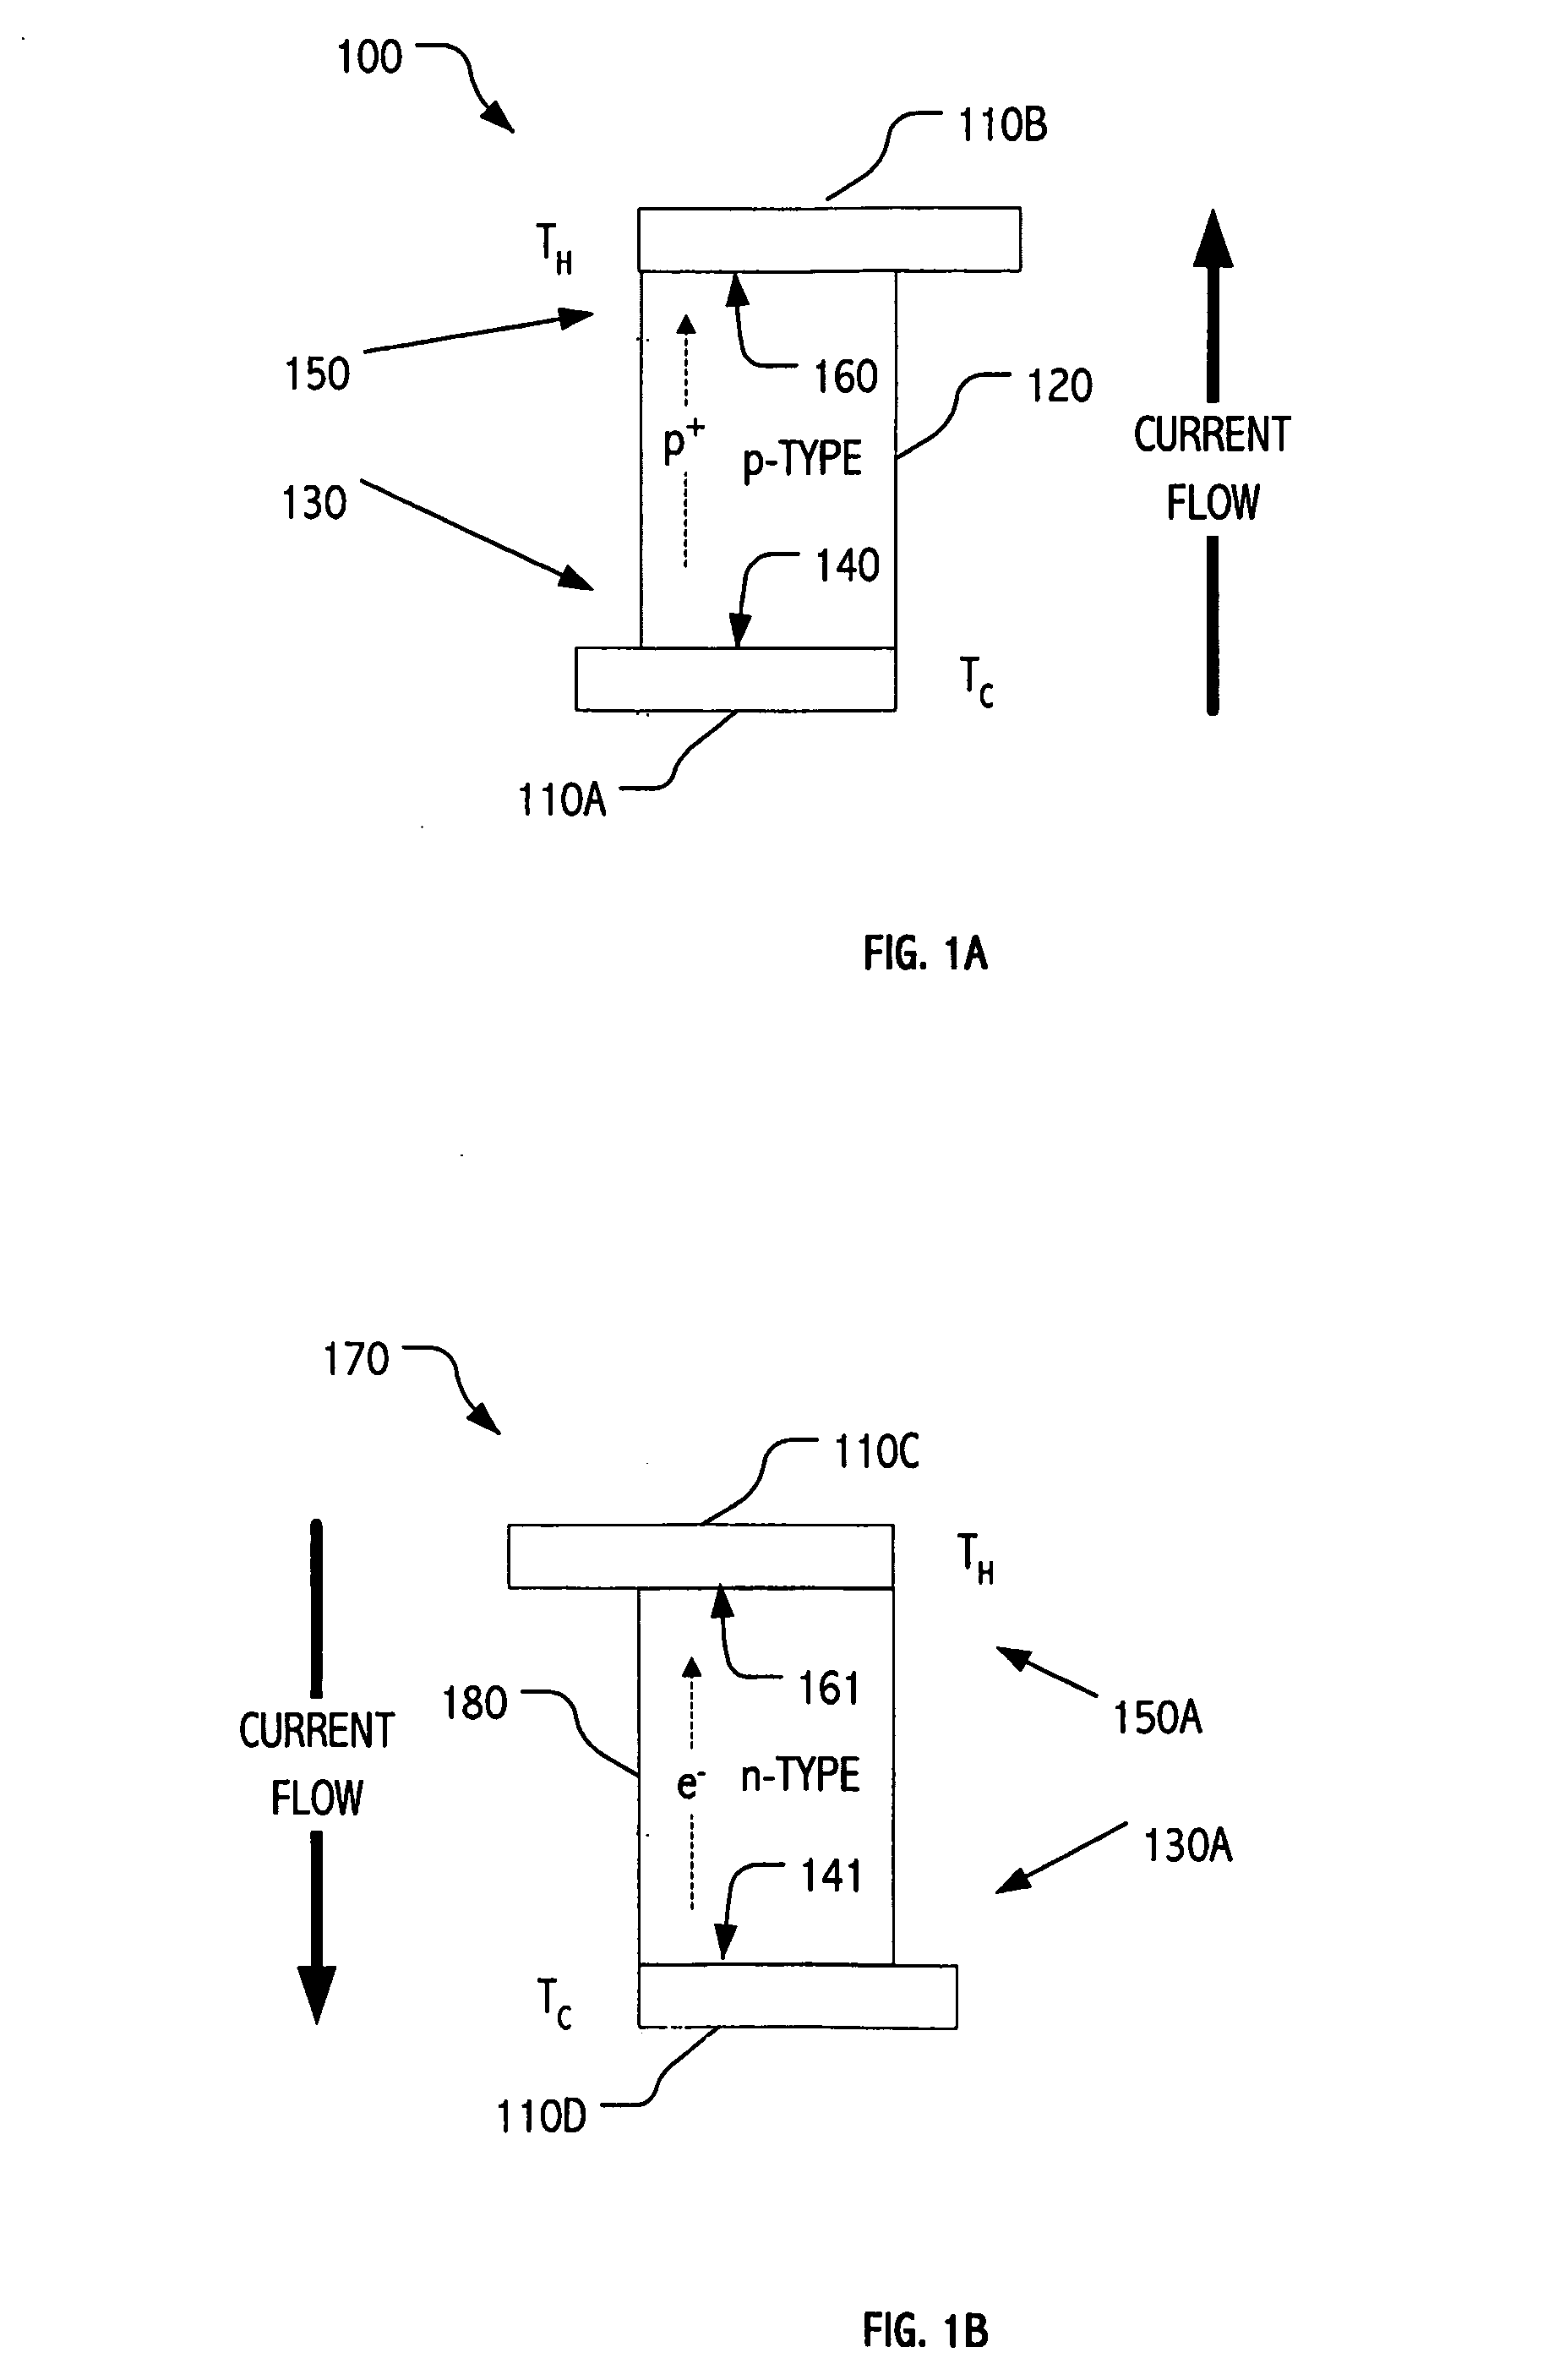 Counterflow thermoelectric configuration employing thermal transfer fluid in closed cycle